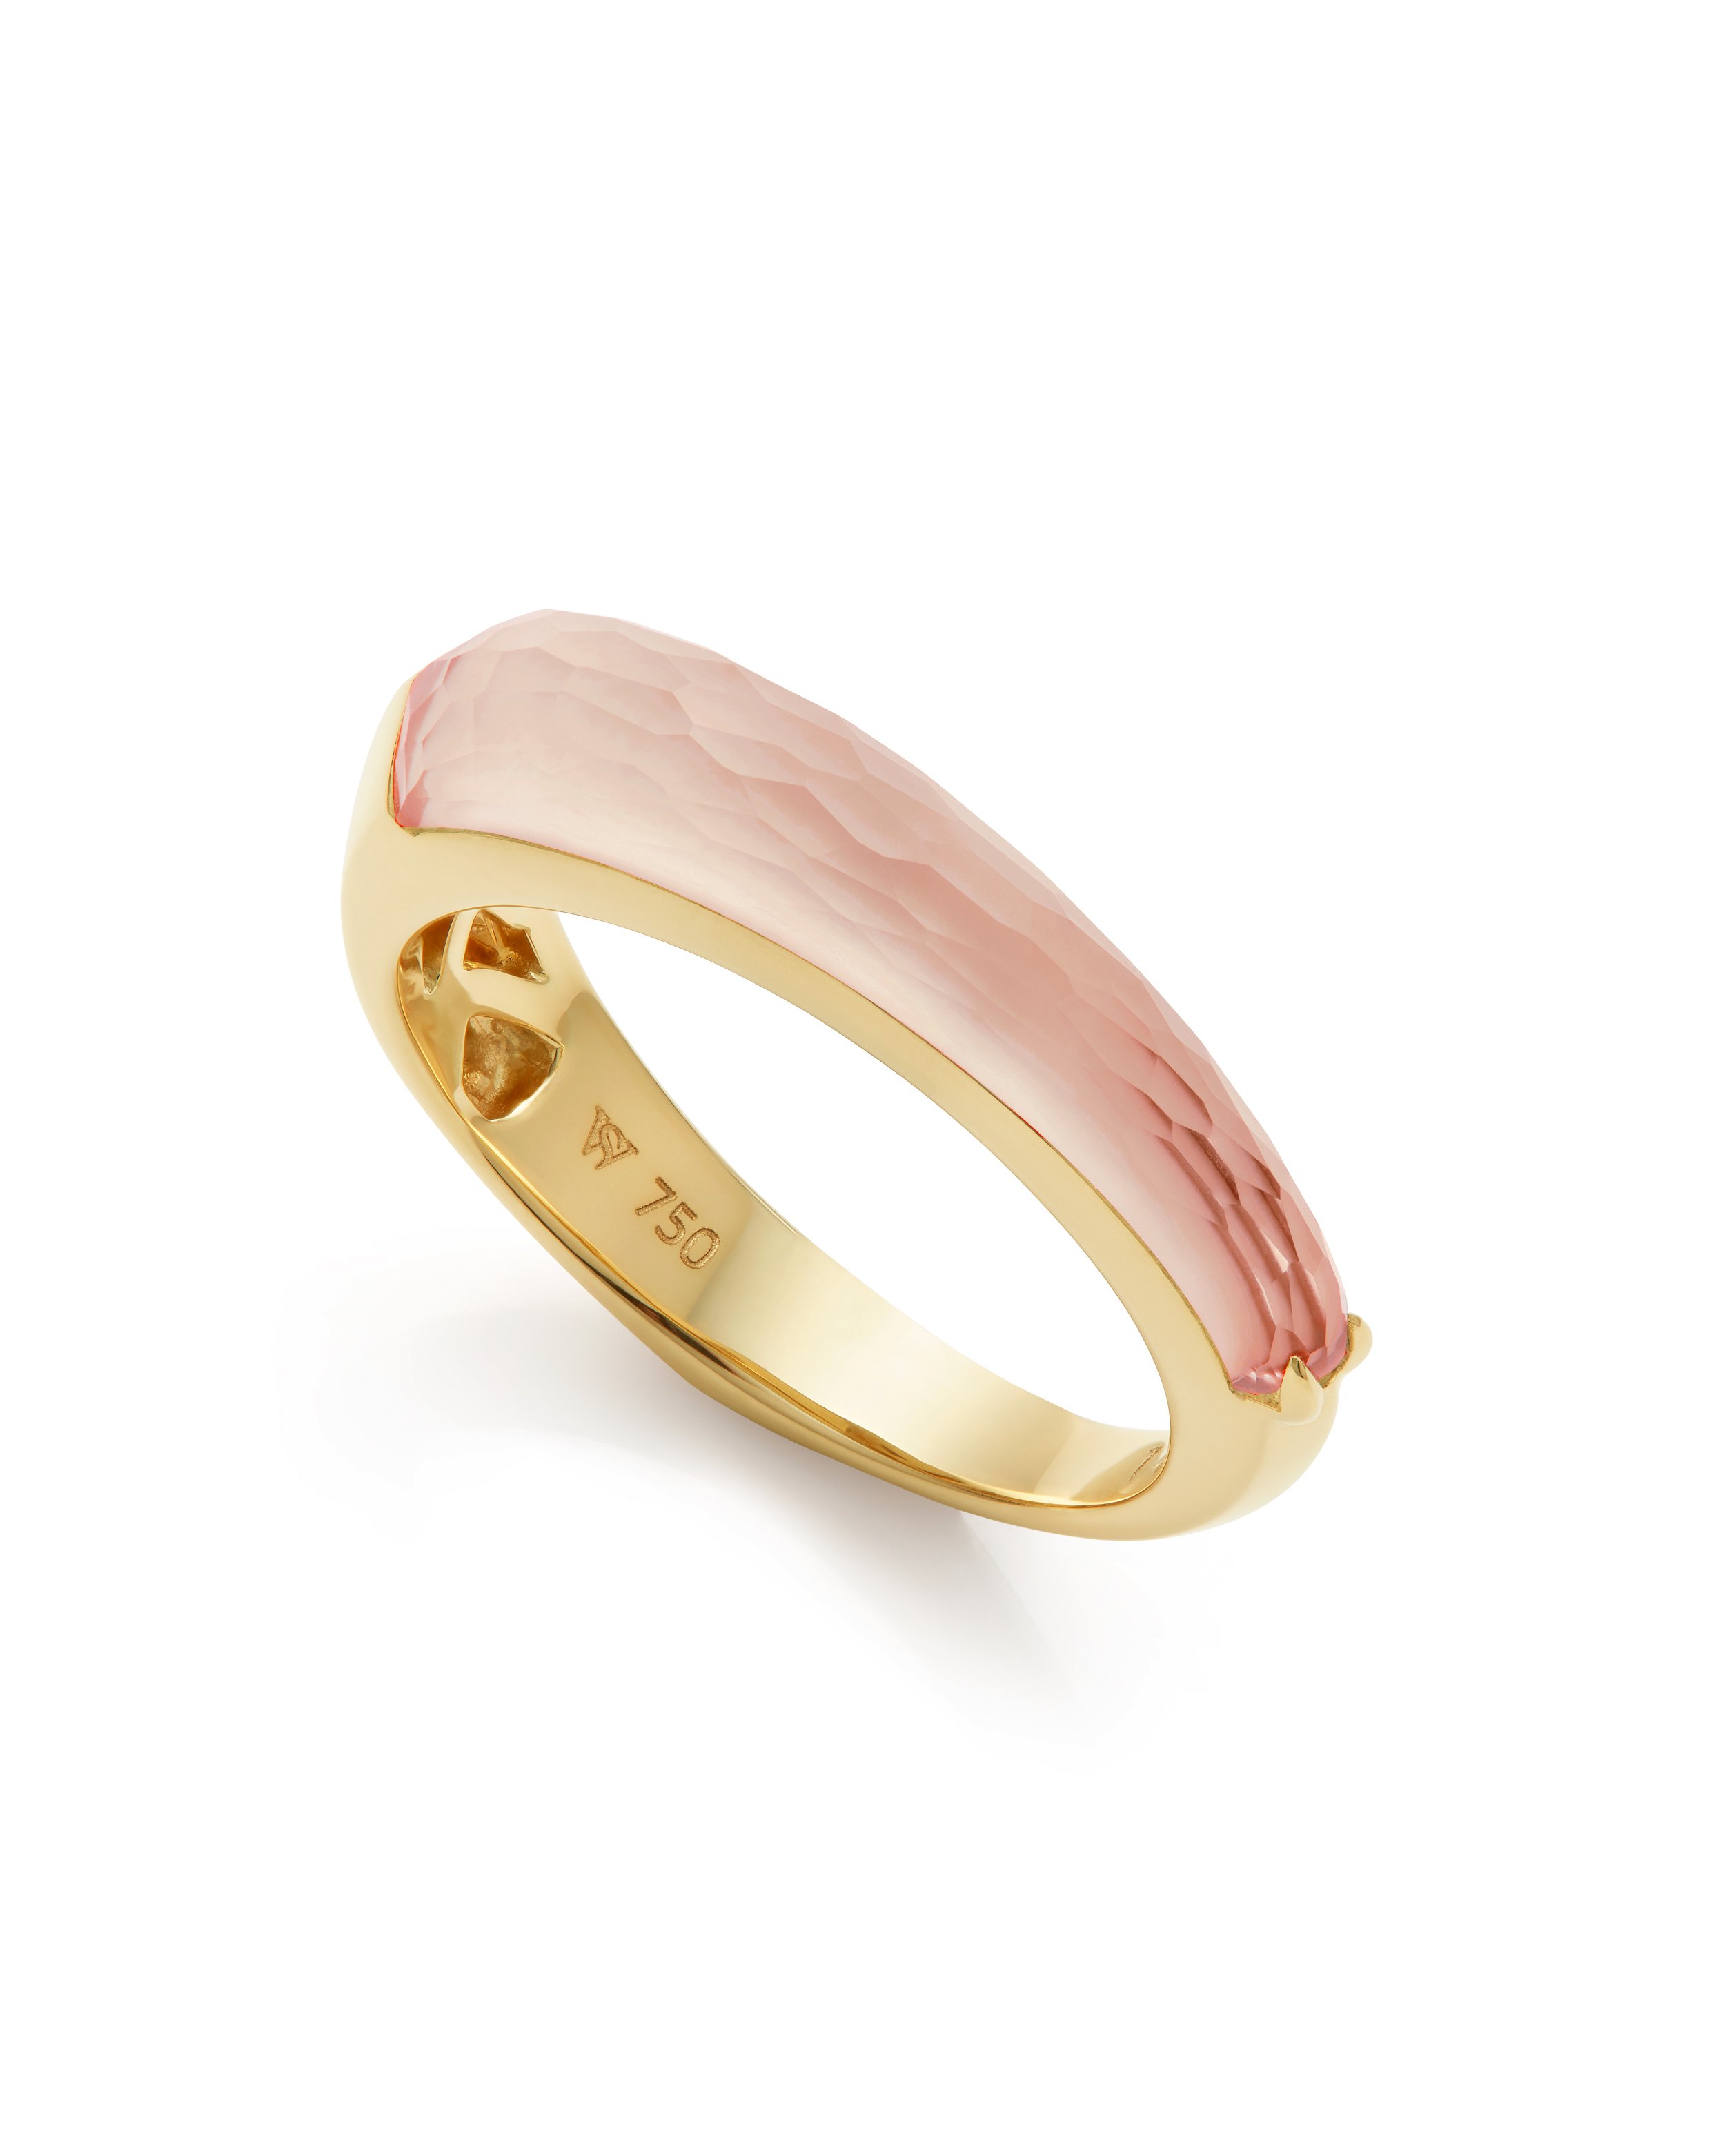 CH2 Shard Slimline Stack Ring with Peach Quartz in 18kt Yellow Gold - Size 7